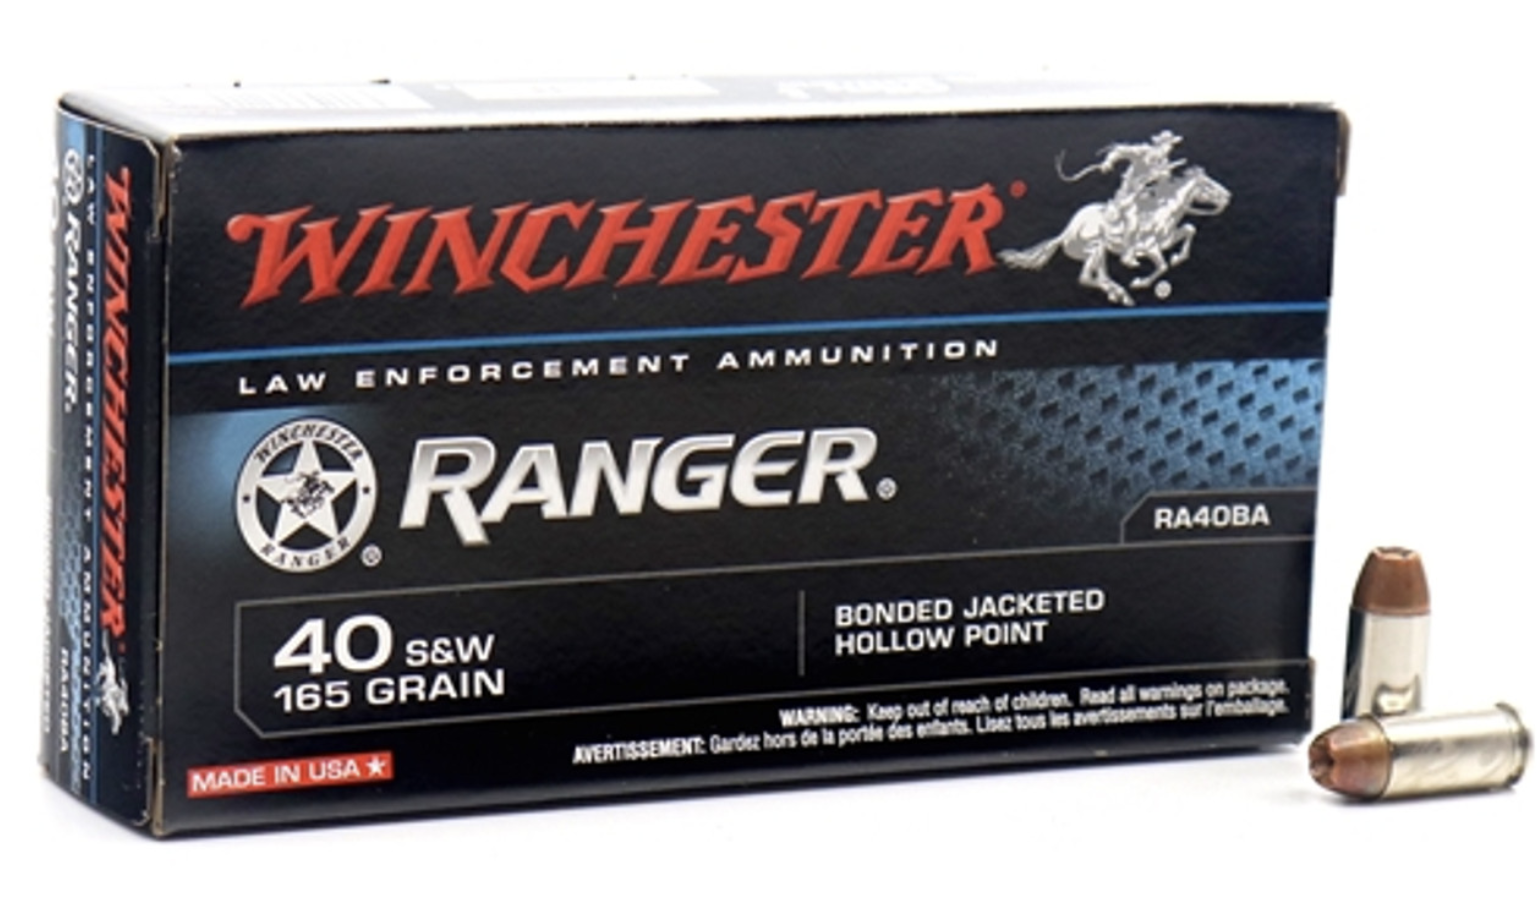 WINCHESTER .40 S&W AMMO 165 GRAIN RANGER SERIES HOLLOW POINT 100 Rounds-img-1